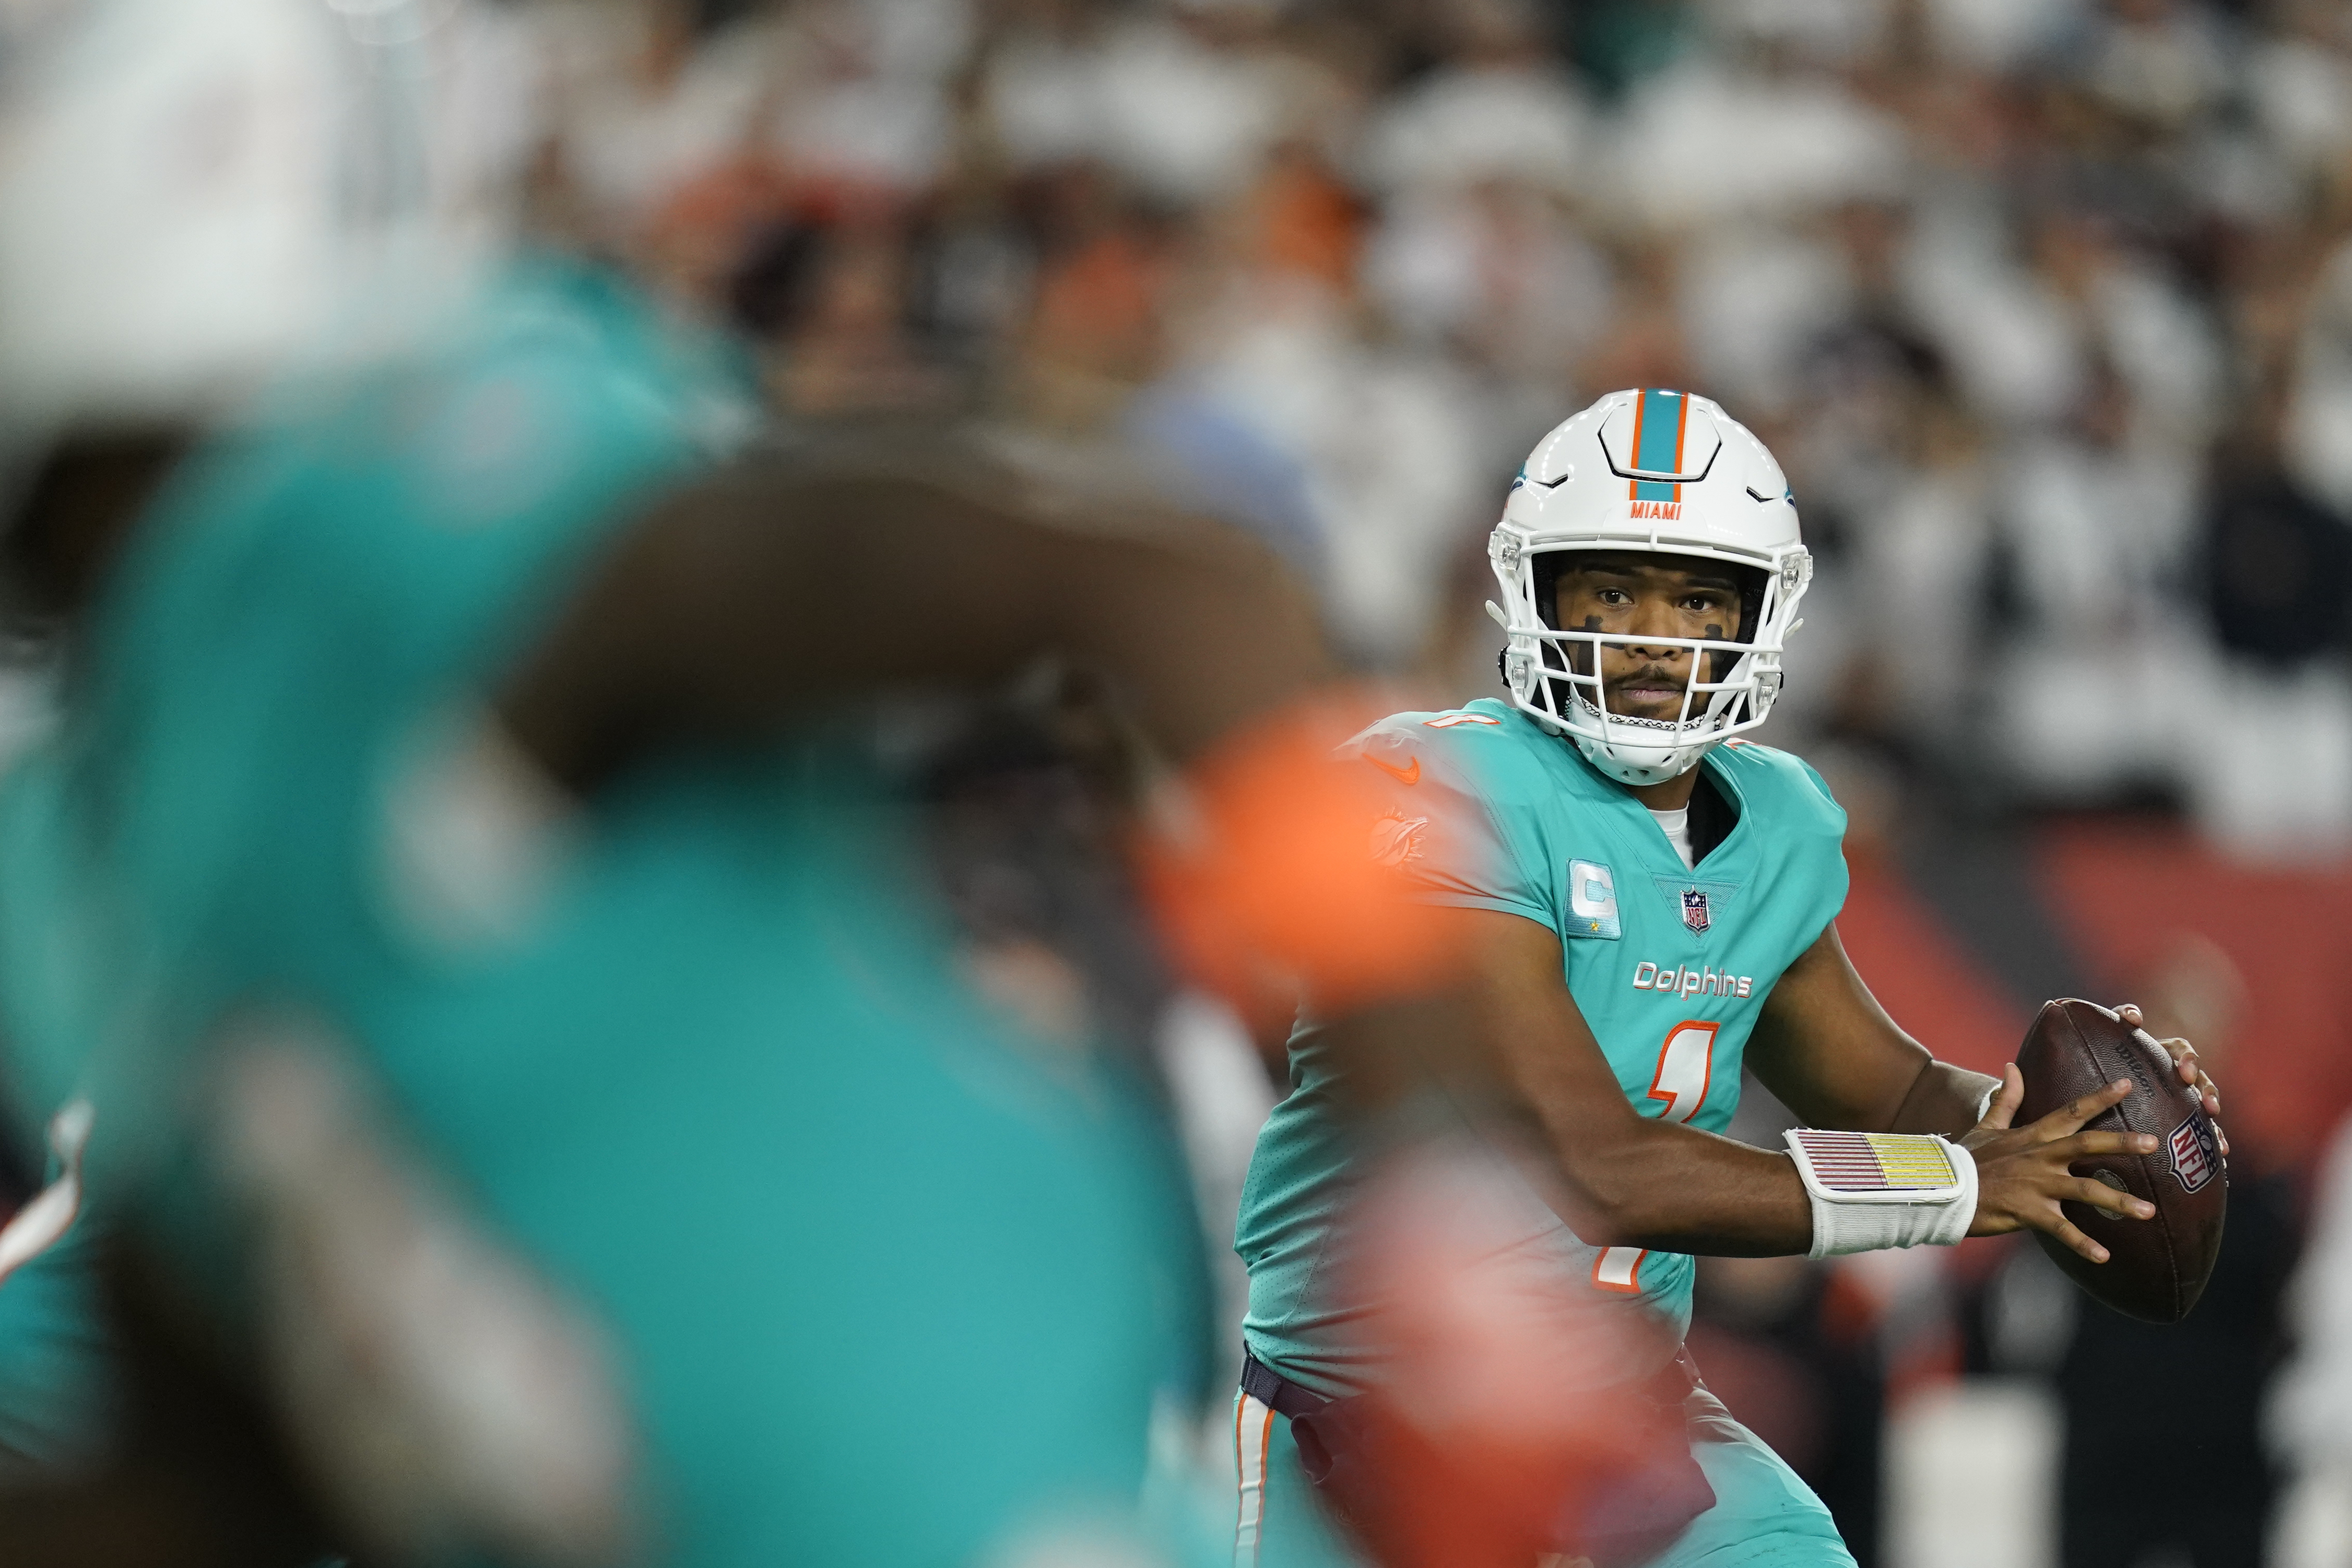 Dolphins' Tua Tagovailoa Returns Home After Suffering Head Injury, 'In Good  Spirits